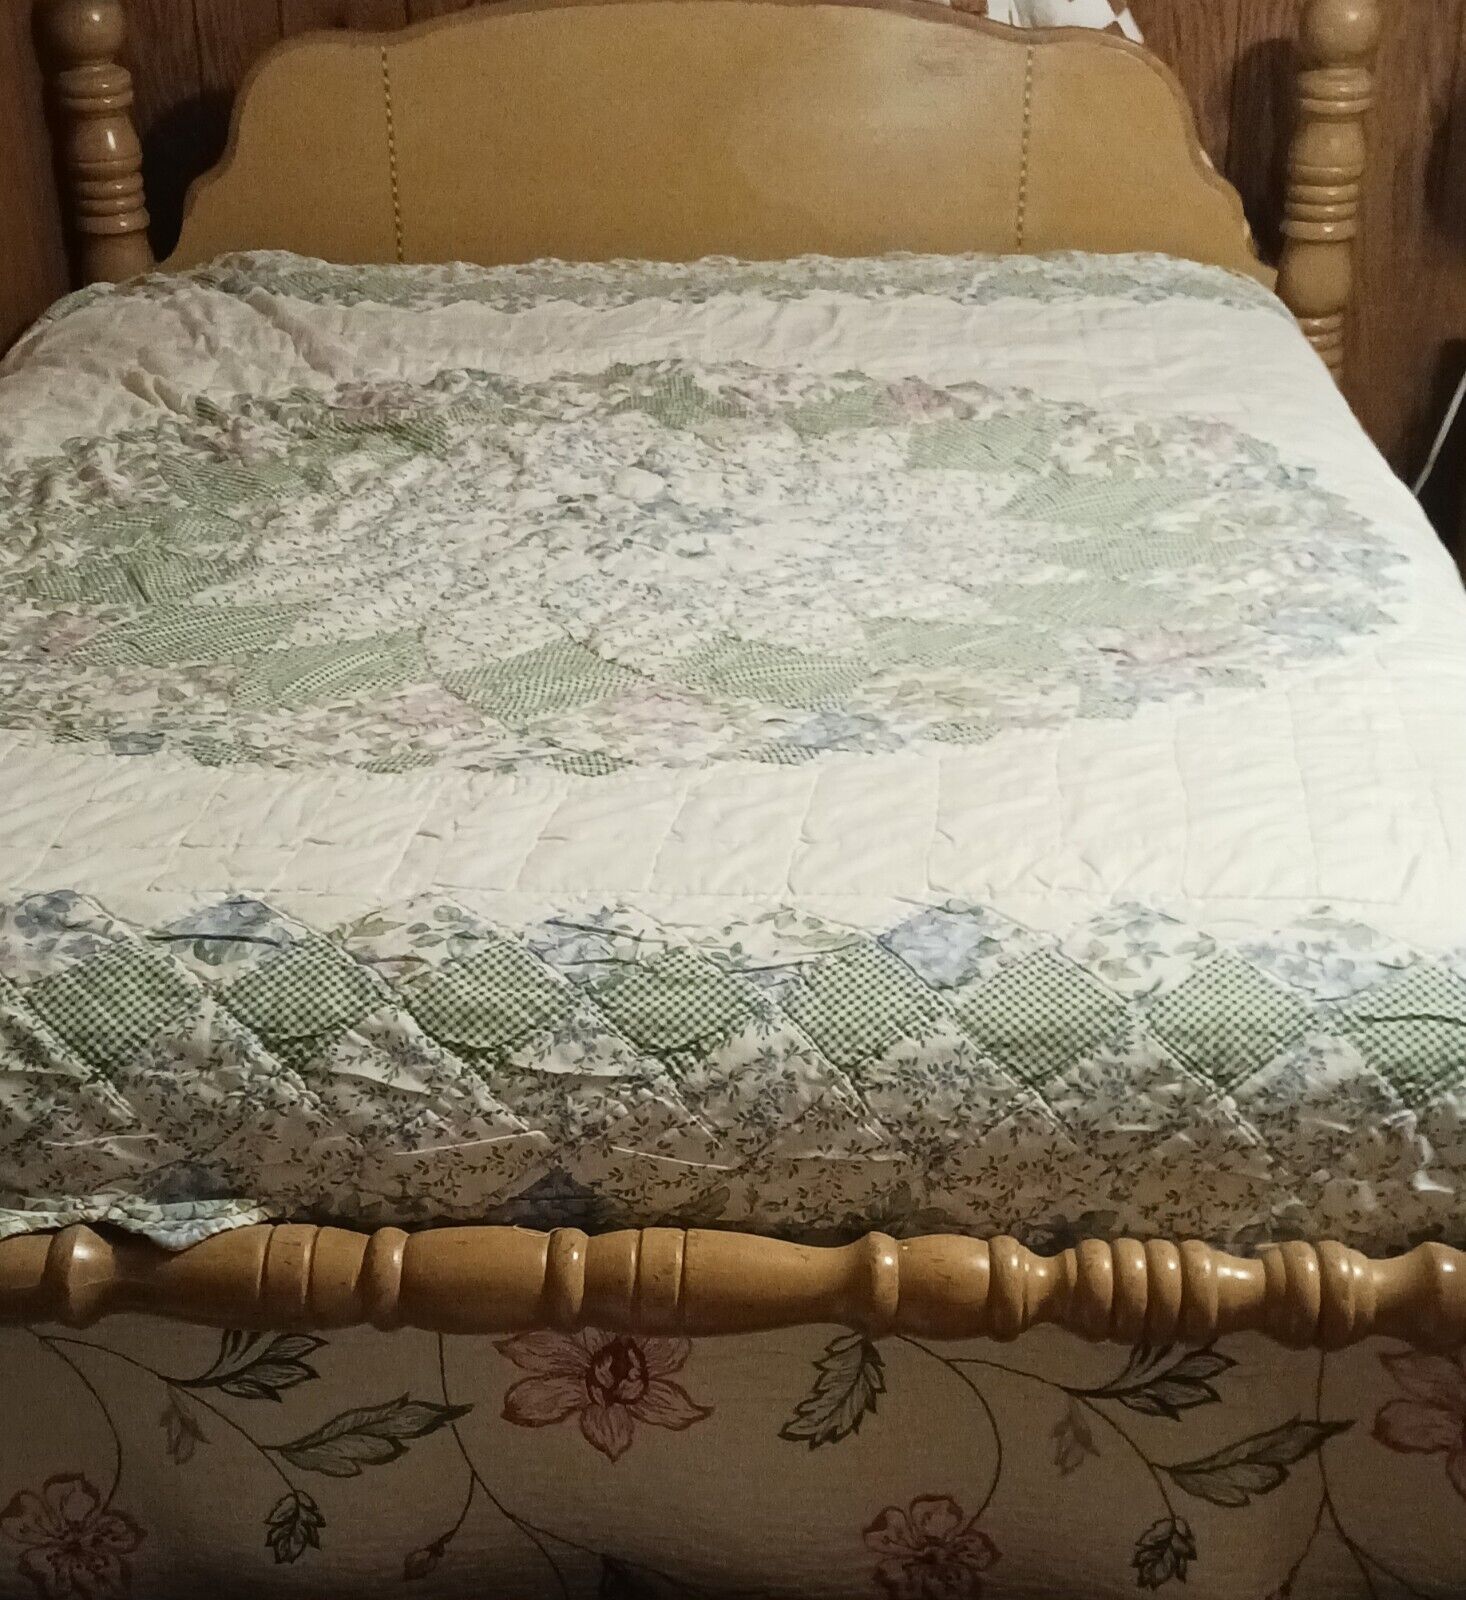 QUILT. CUTTER QUILT?HOMEMADE, HOME STITCHED. GREEN CHECK FLORAL, 42X45.